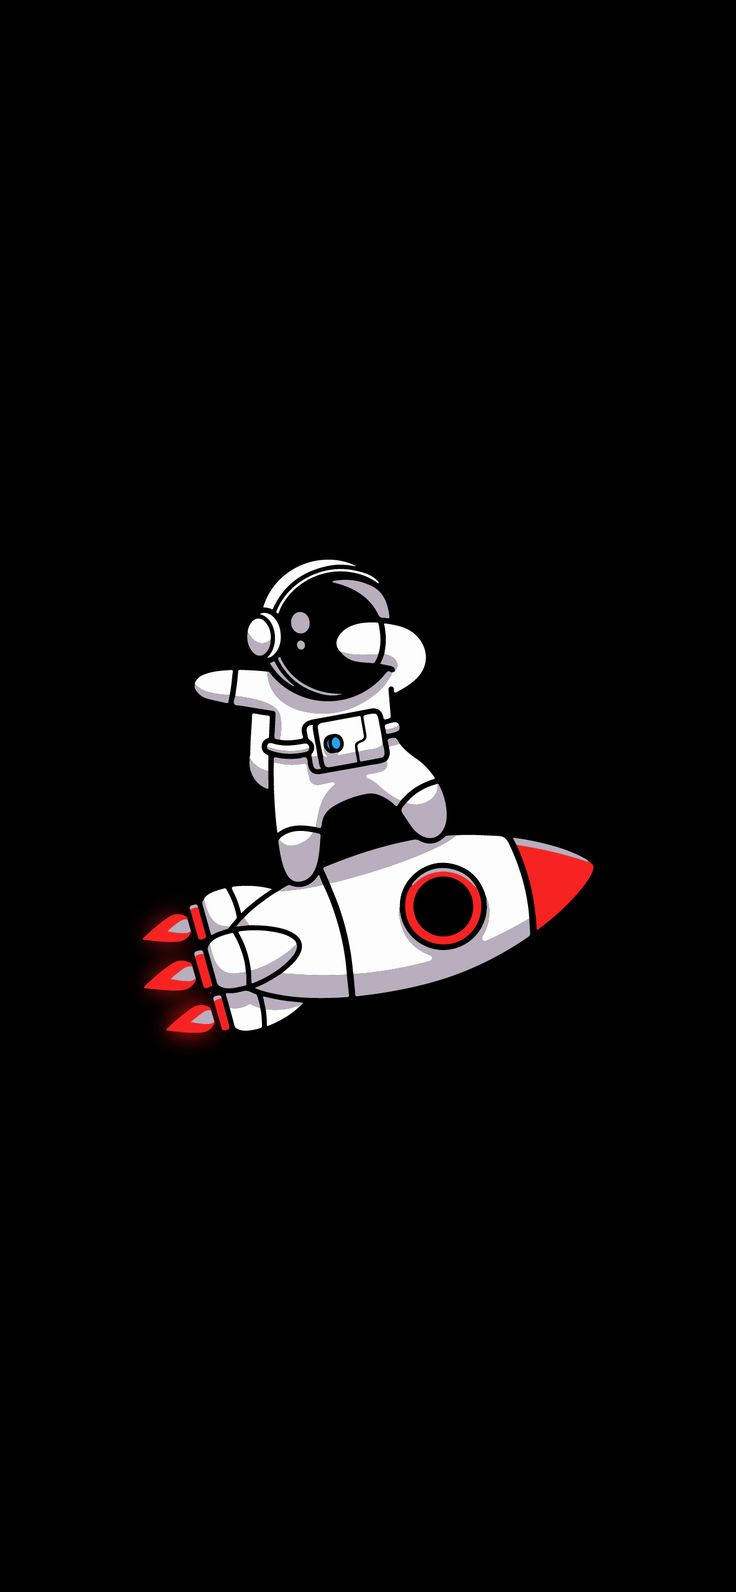 Download Amoled Android Cute Astronaut Art Wallpaper 